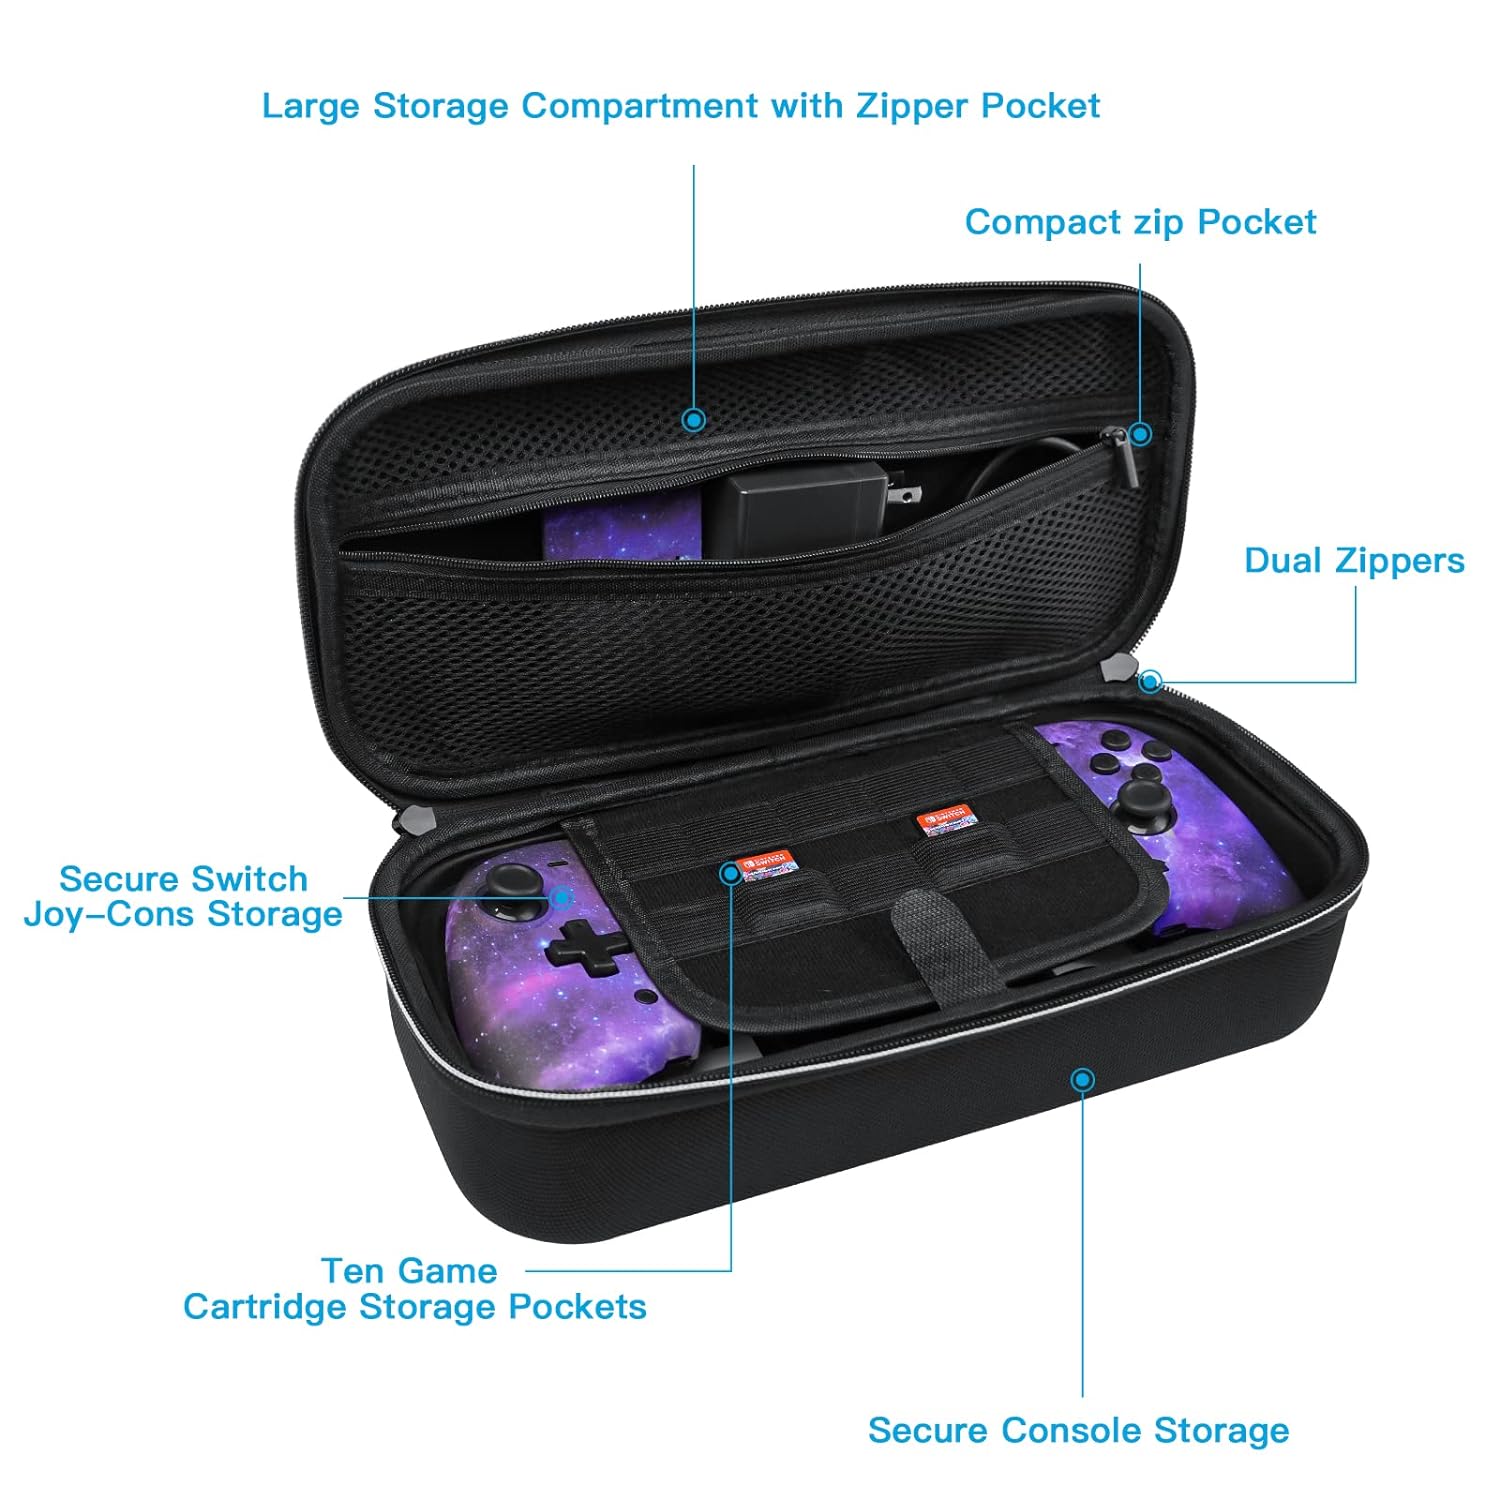 NexiGo Switch Controller Carrying Case for Nintendo Switch, Game Storage Case with 10 Game Card Holders, Compatible with Gripcon, Joy-Cons and Accessories